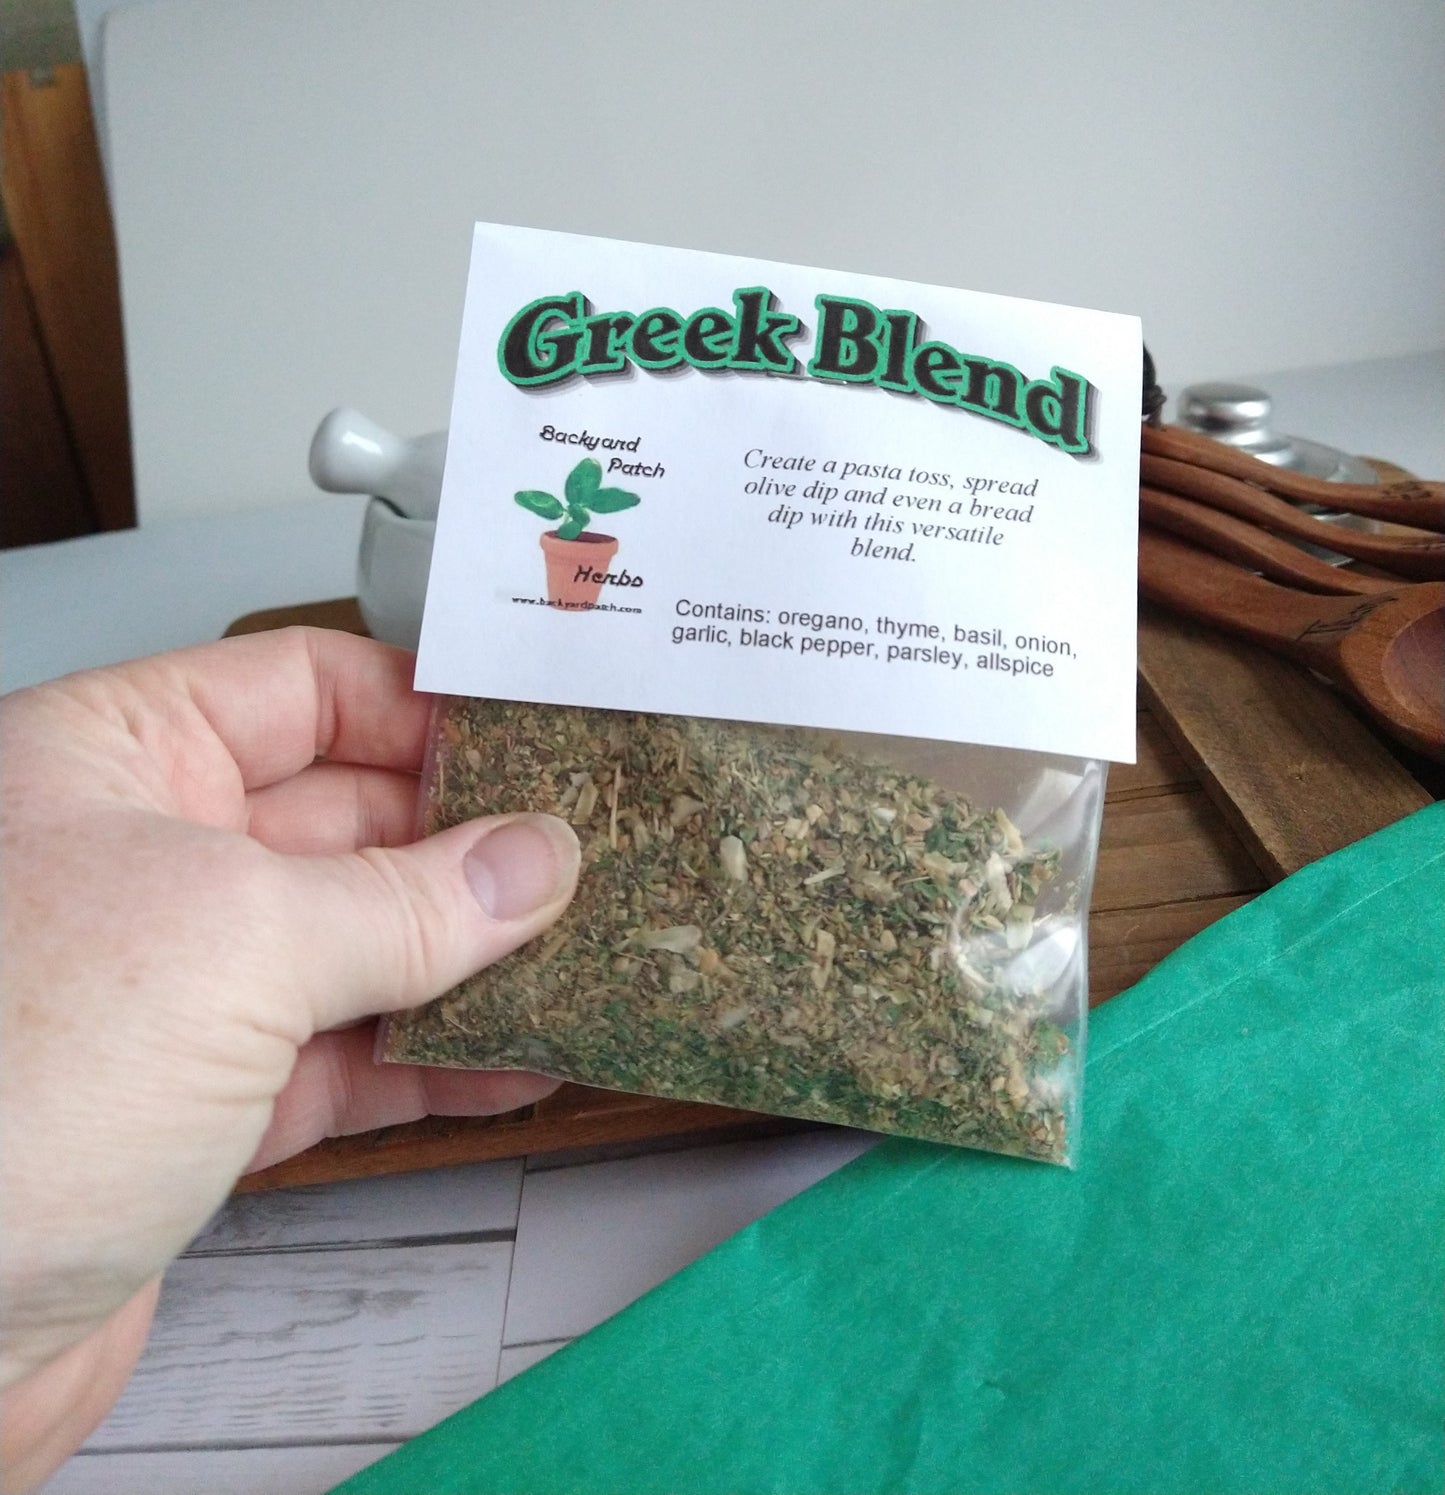 Greek Blend Herb Mix, salt-free blend for pasta, veggies, spreads, dips and more